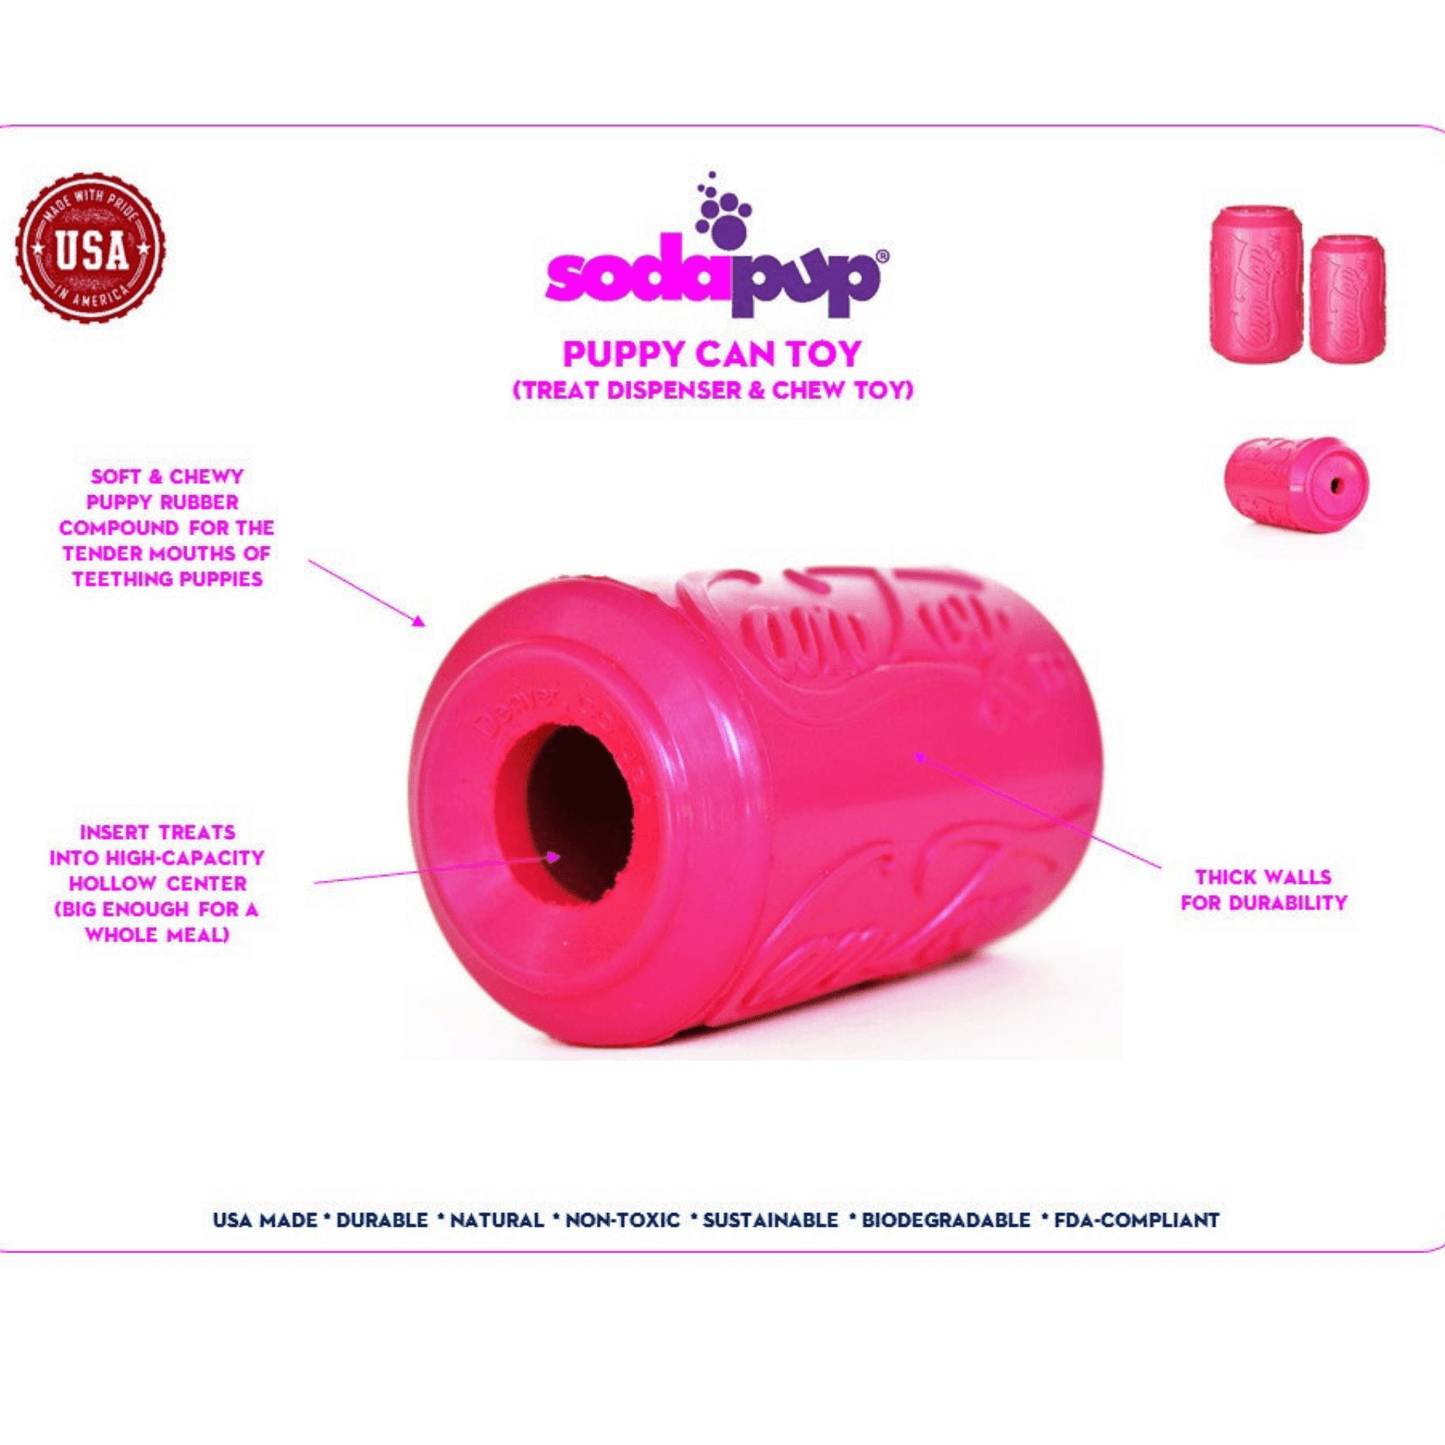 Durable puppy dog toy, enrichment, boredom buster, teething puppies, let's pawty